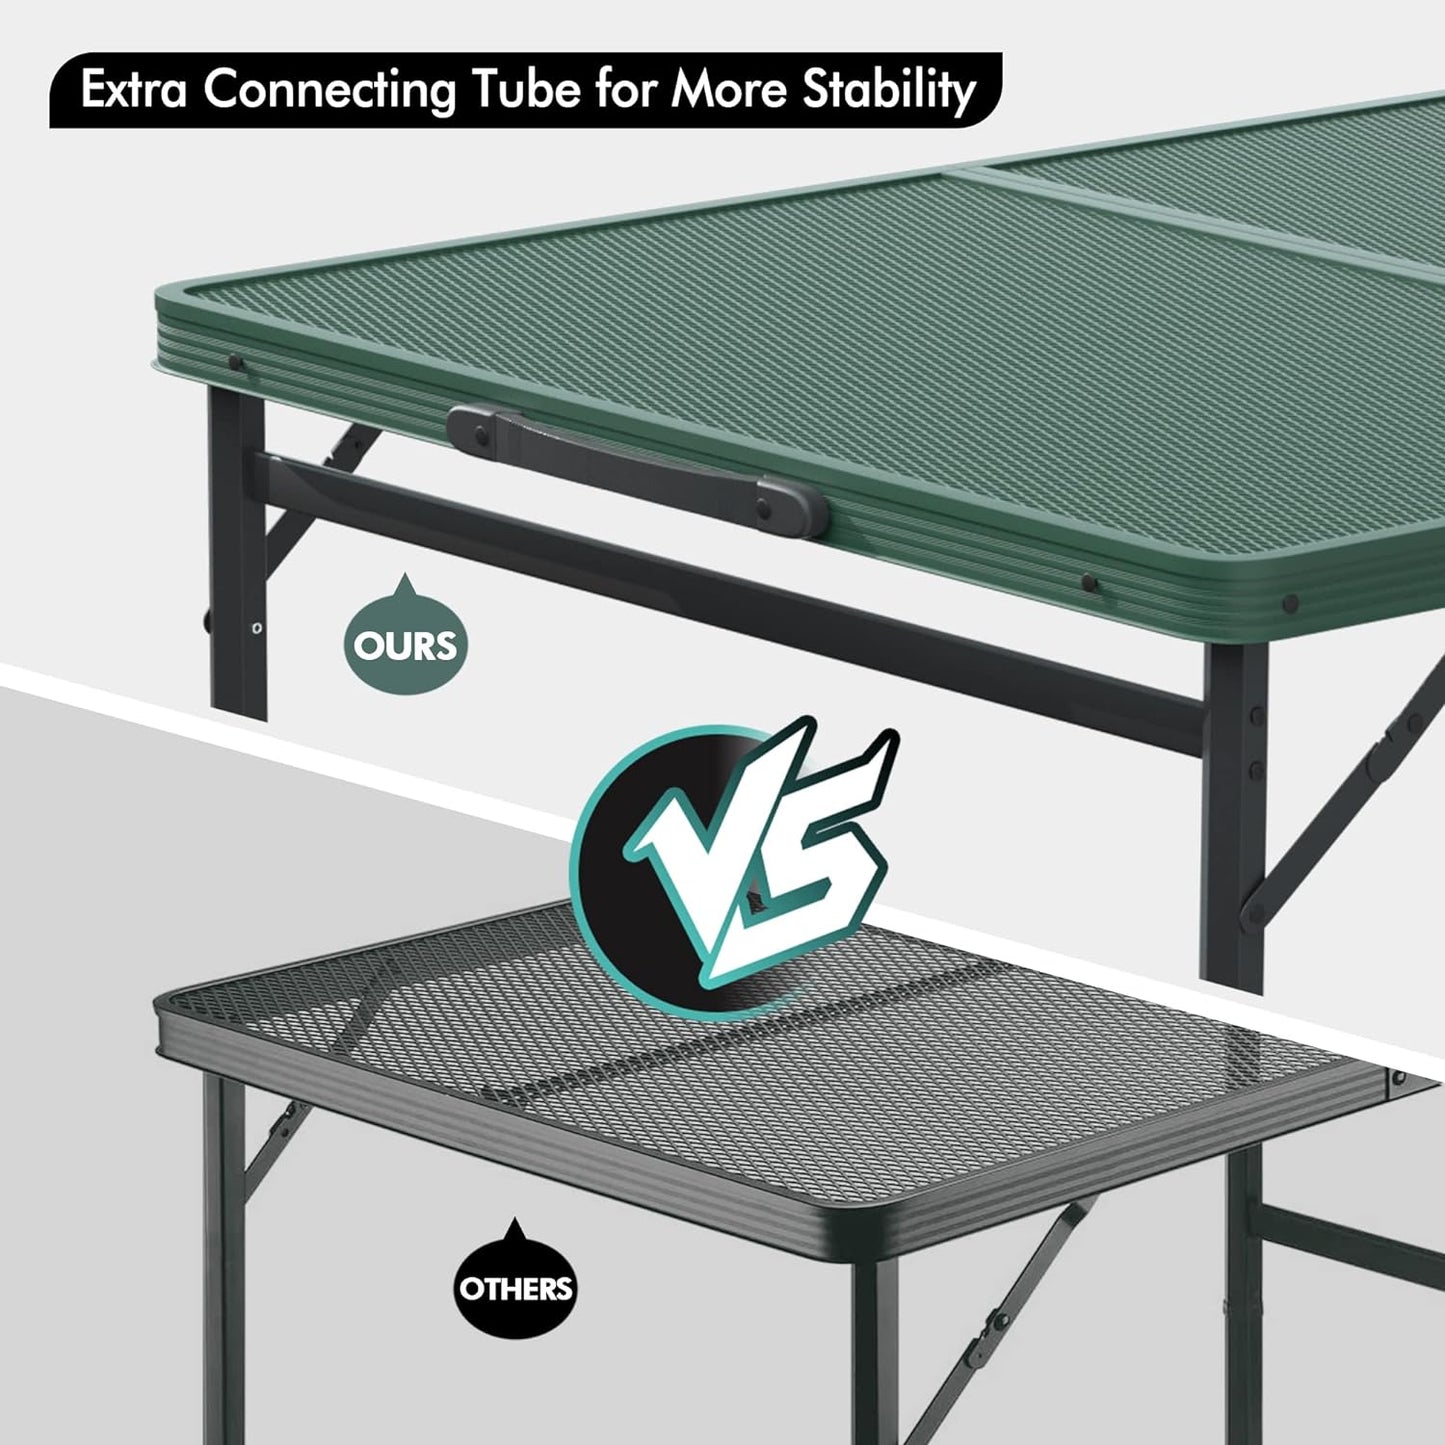 VILLEY Grill Table, 3ft Folding Camping Table with Aluminum Adjustable Legs, Portable Lightweight Camp Table for Beach Picnics and Outdoor Cooking